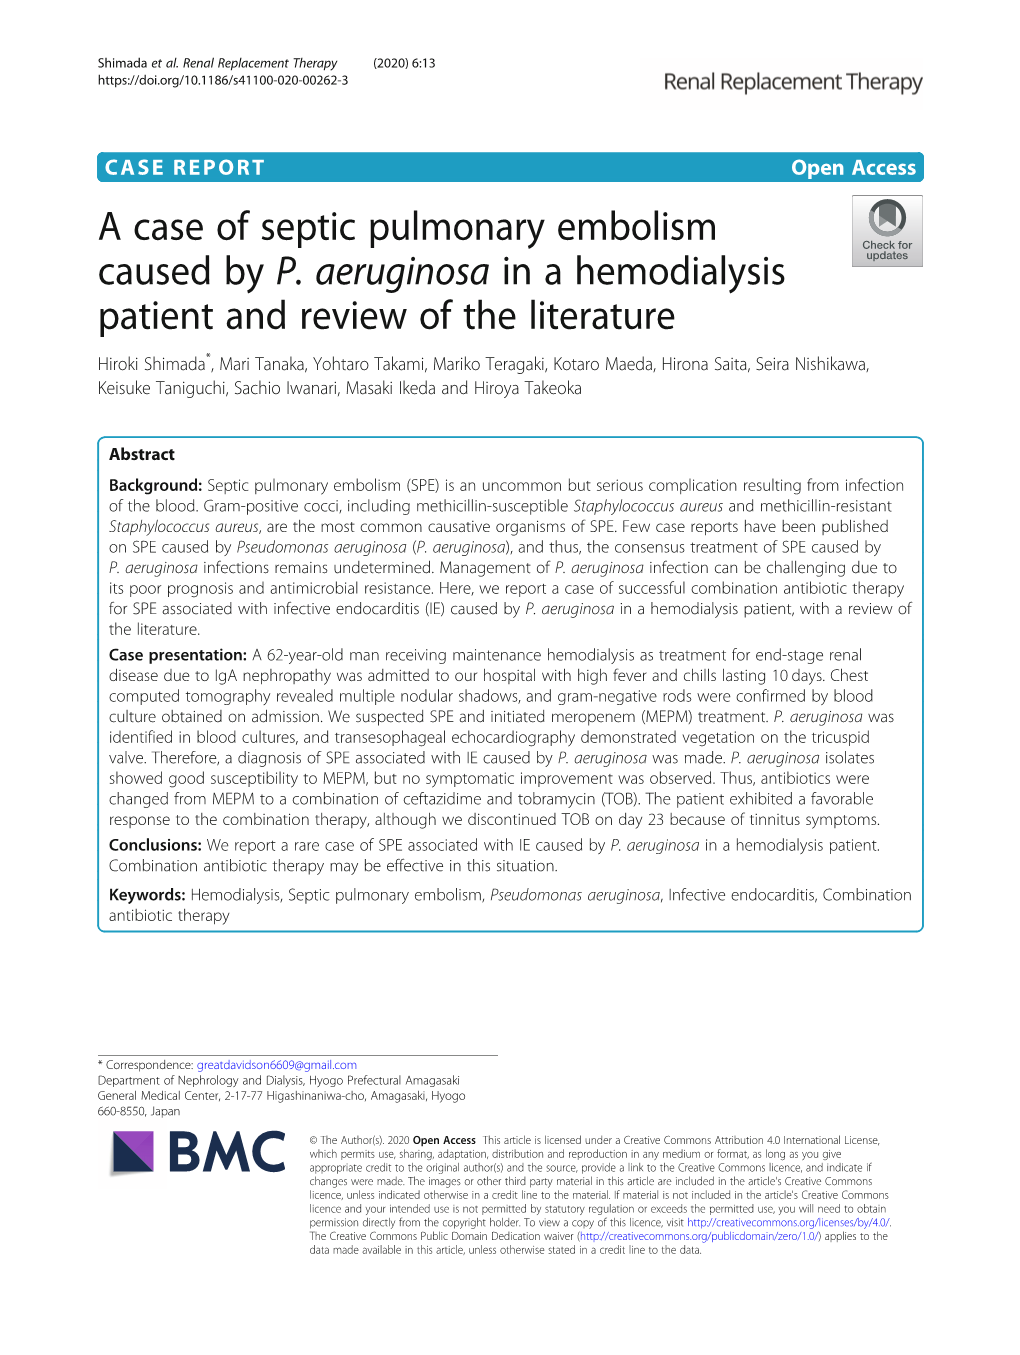 A Case of Septic Pulmonary Embolism Caused by P. Aeruginosa in A